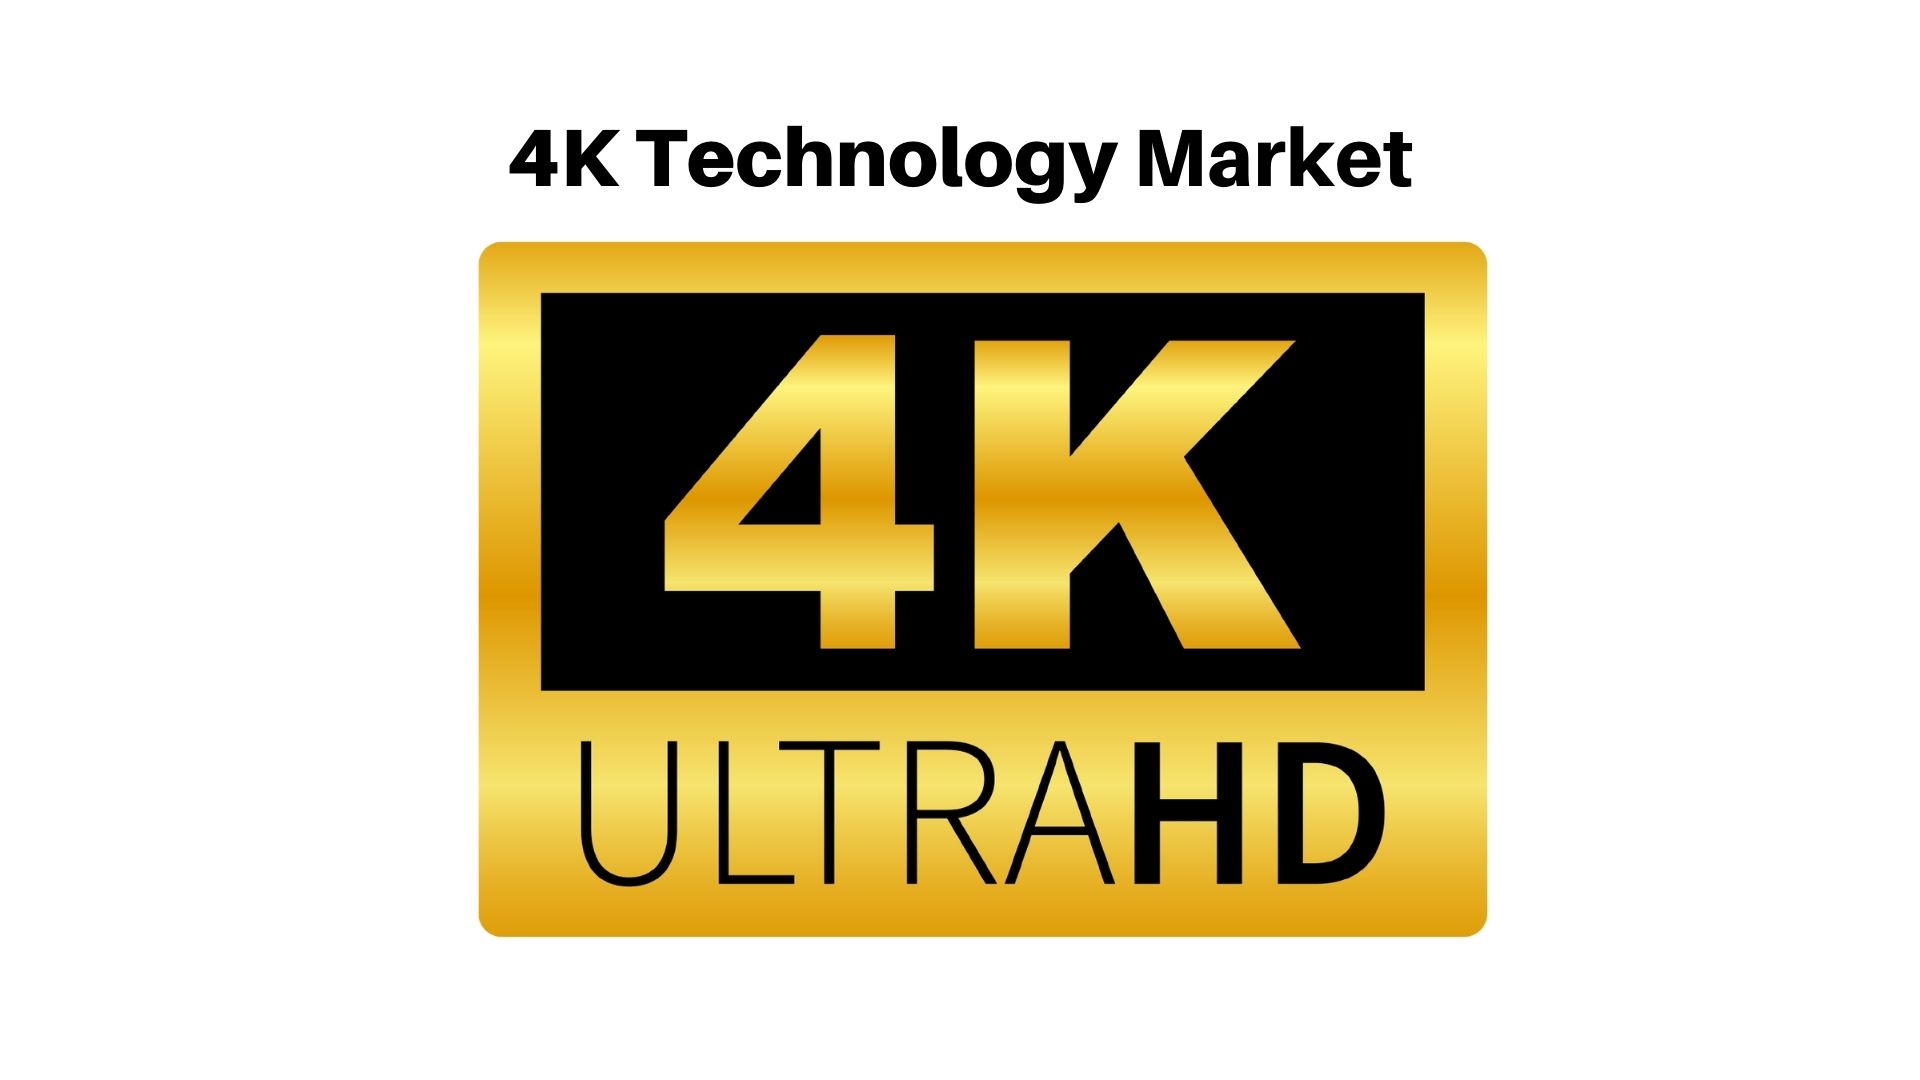 4K Technology Market Report Offers In-Depth Analysis + Growth Rate 22.6% by 2032